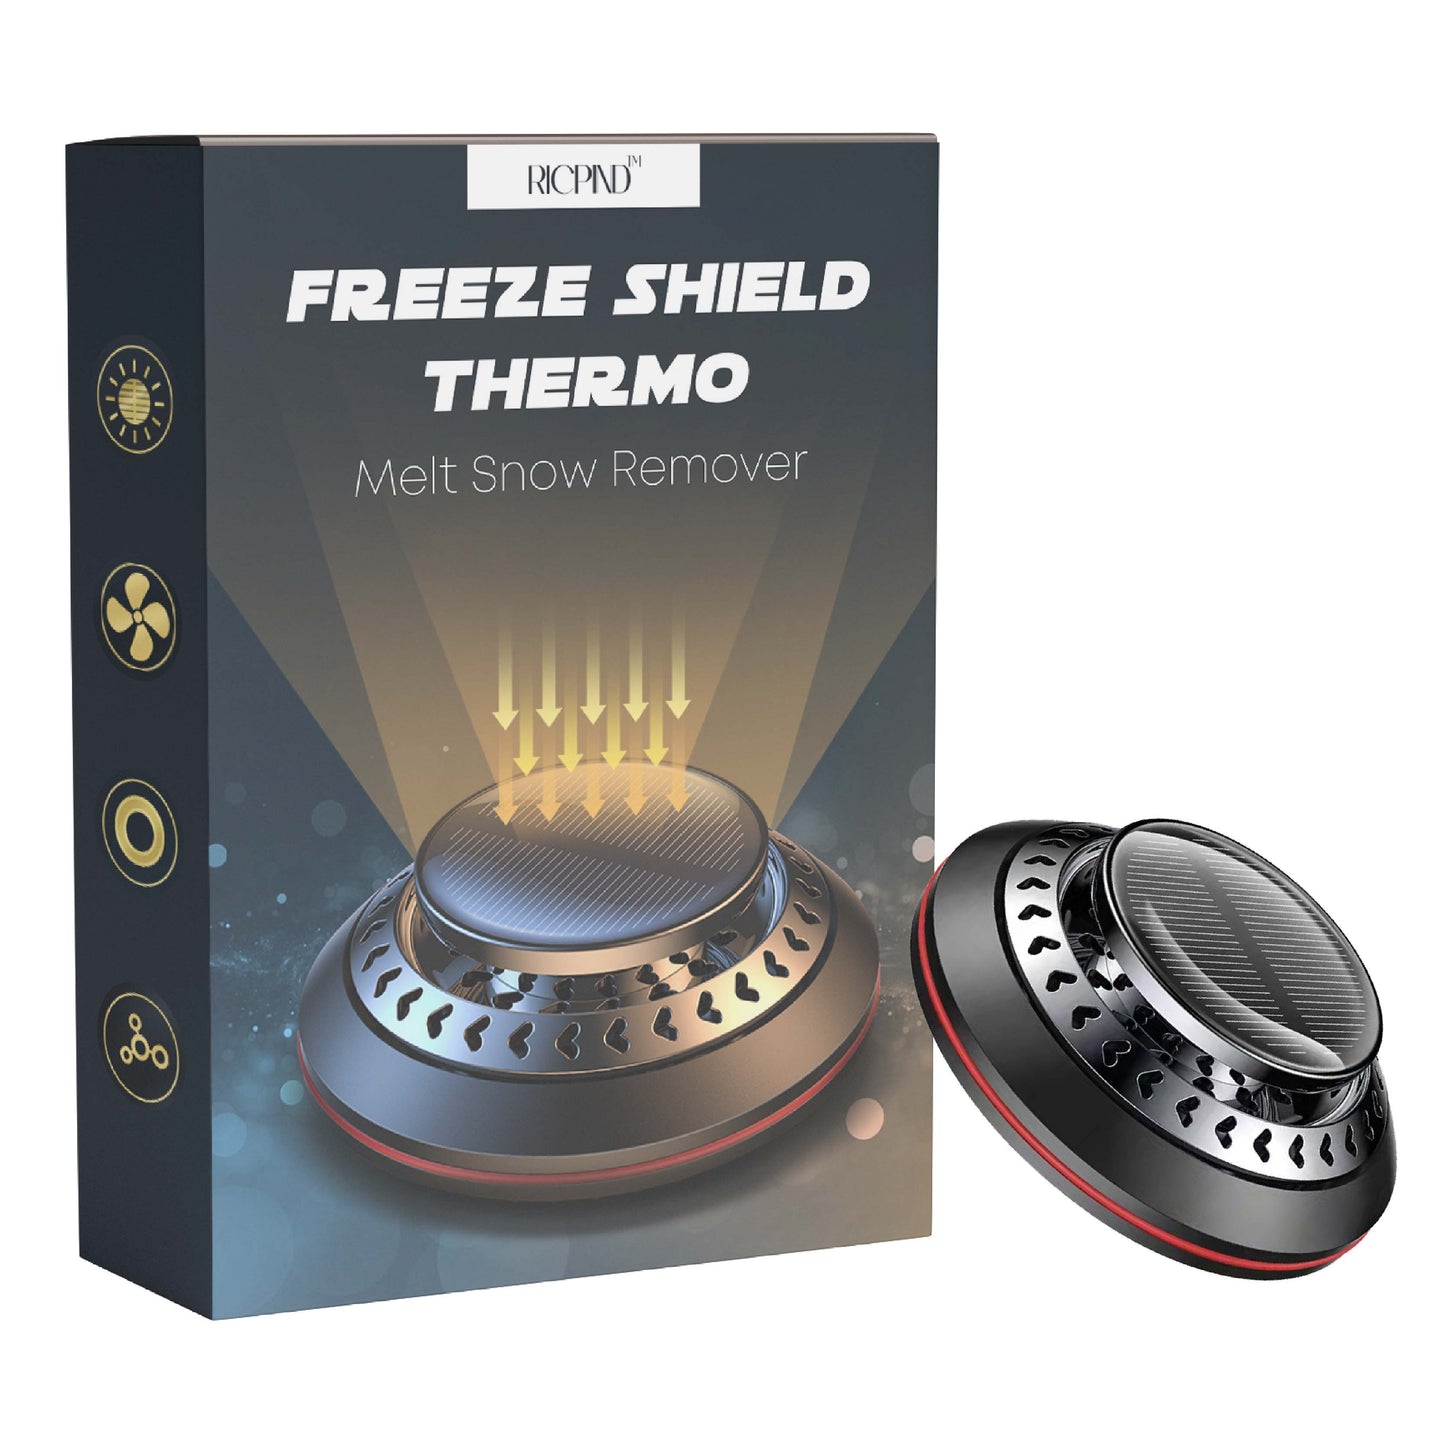 RICPIND FreezeShield ThermoMelt Snow Remover